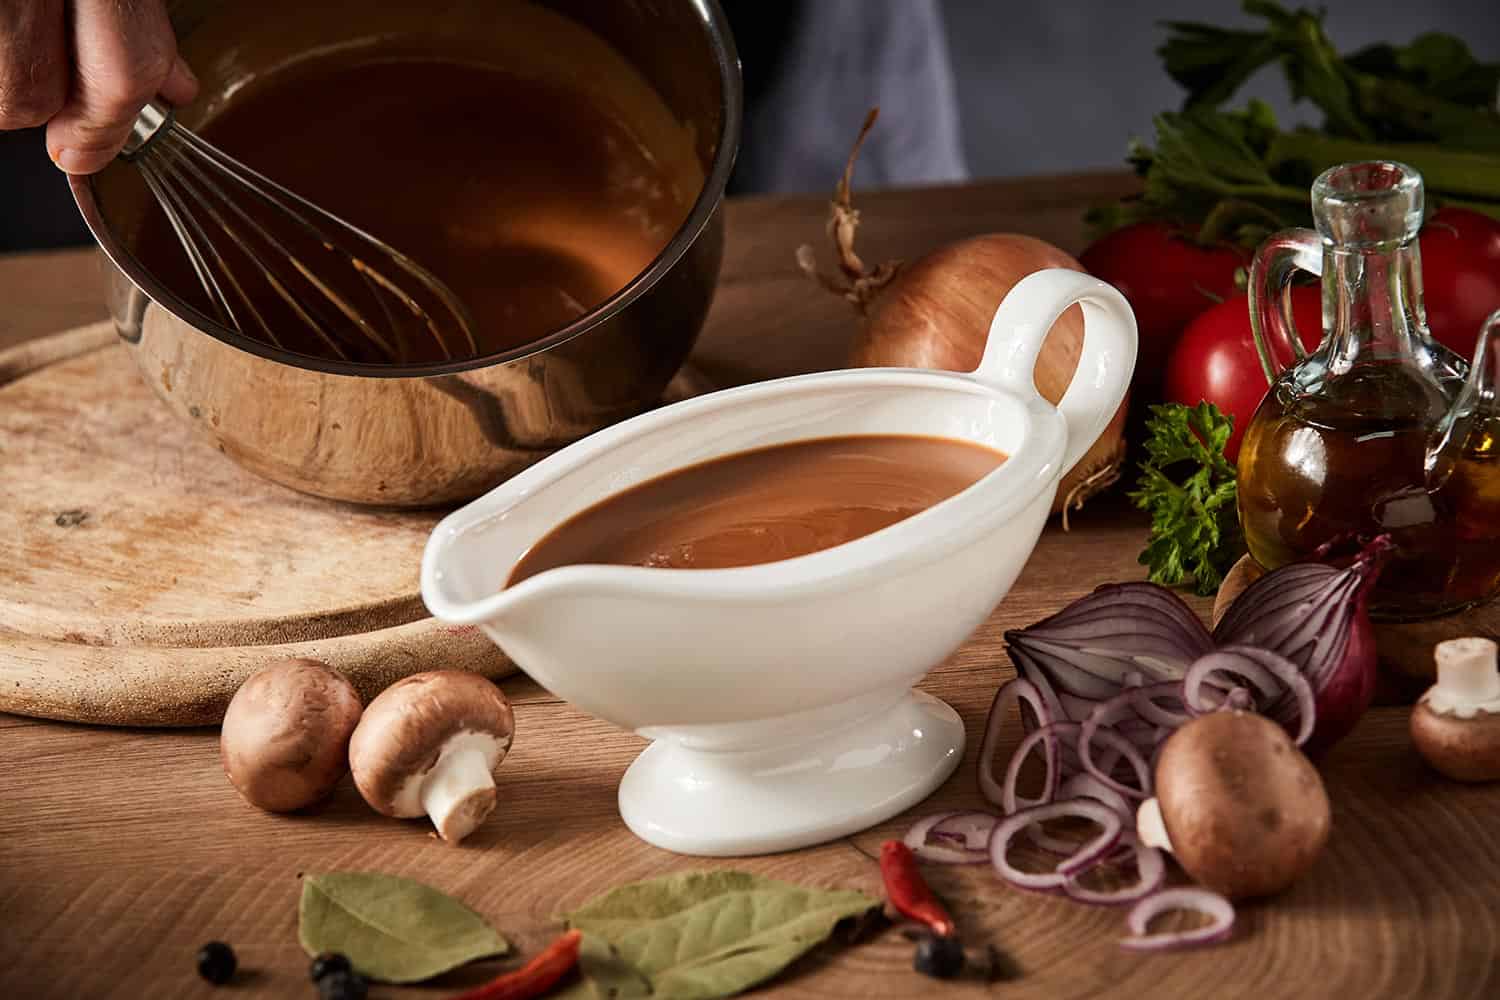 Chef preparing a serving of delicious spicy rich gravy whisking it in a pot